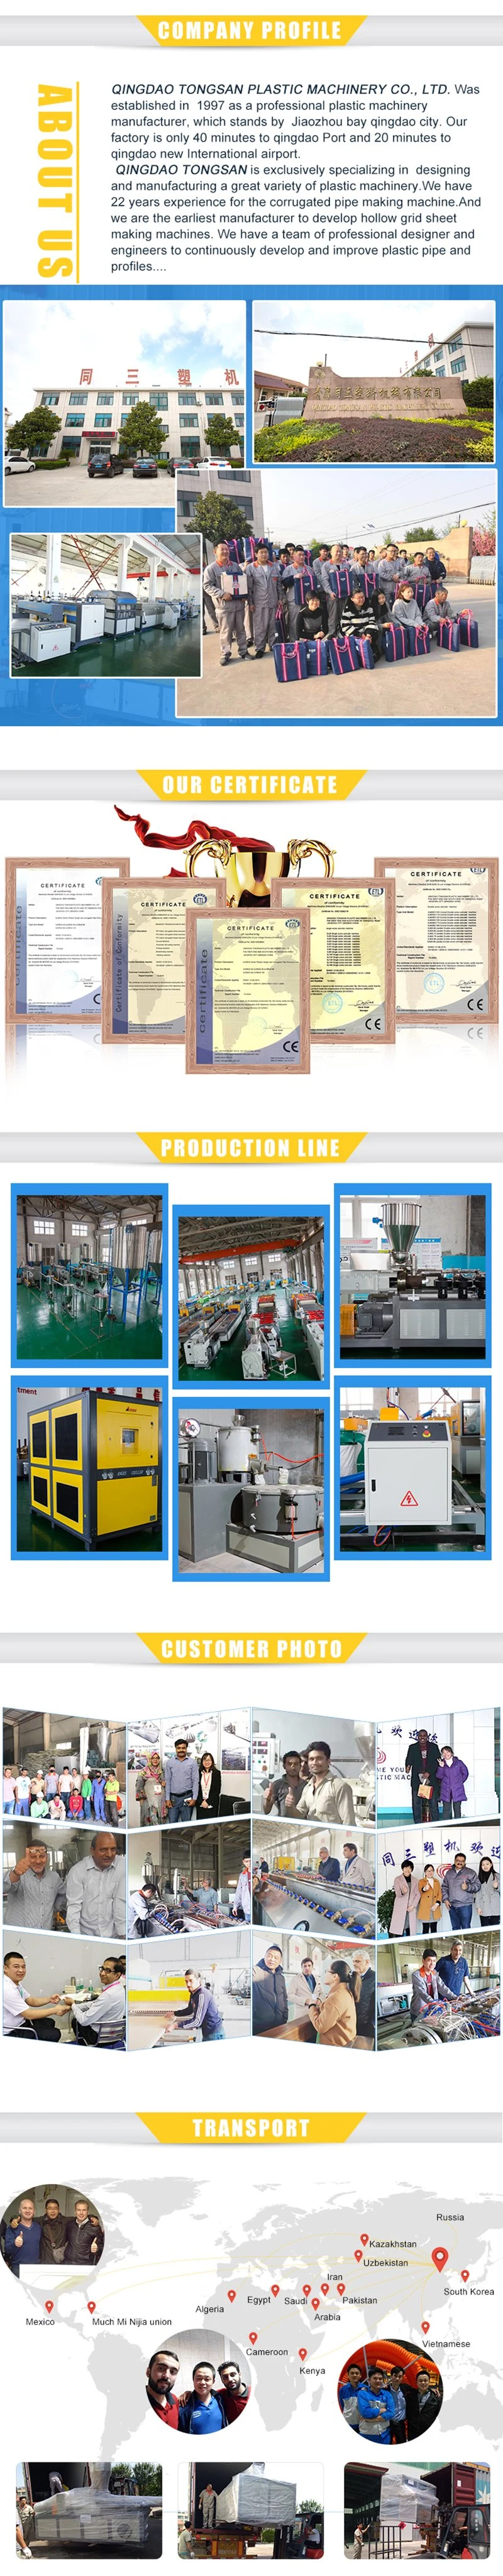 32mm-300mm HDPE Double Wall Corrugated Pipe Extruder/ Plastic Dwc Pipe Machine Extruder